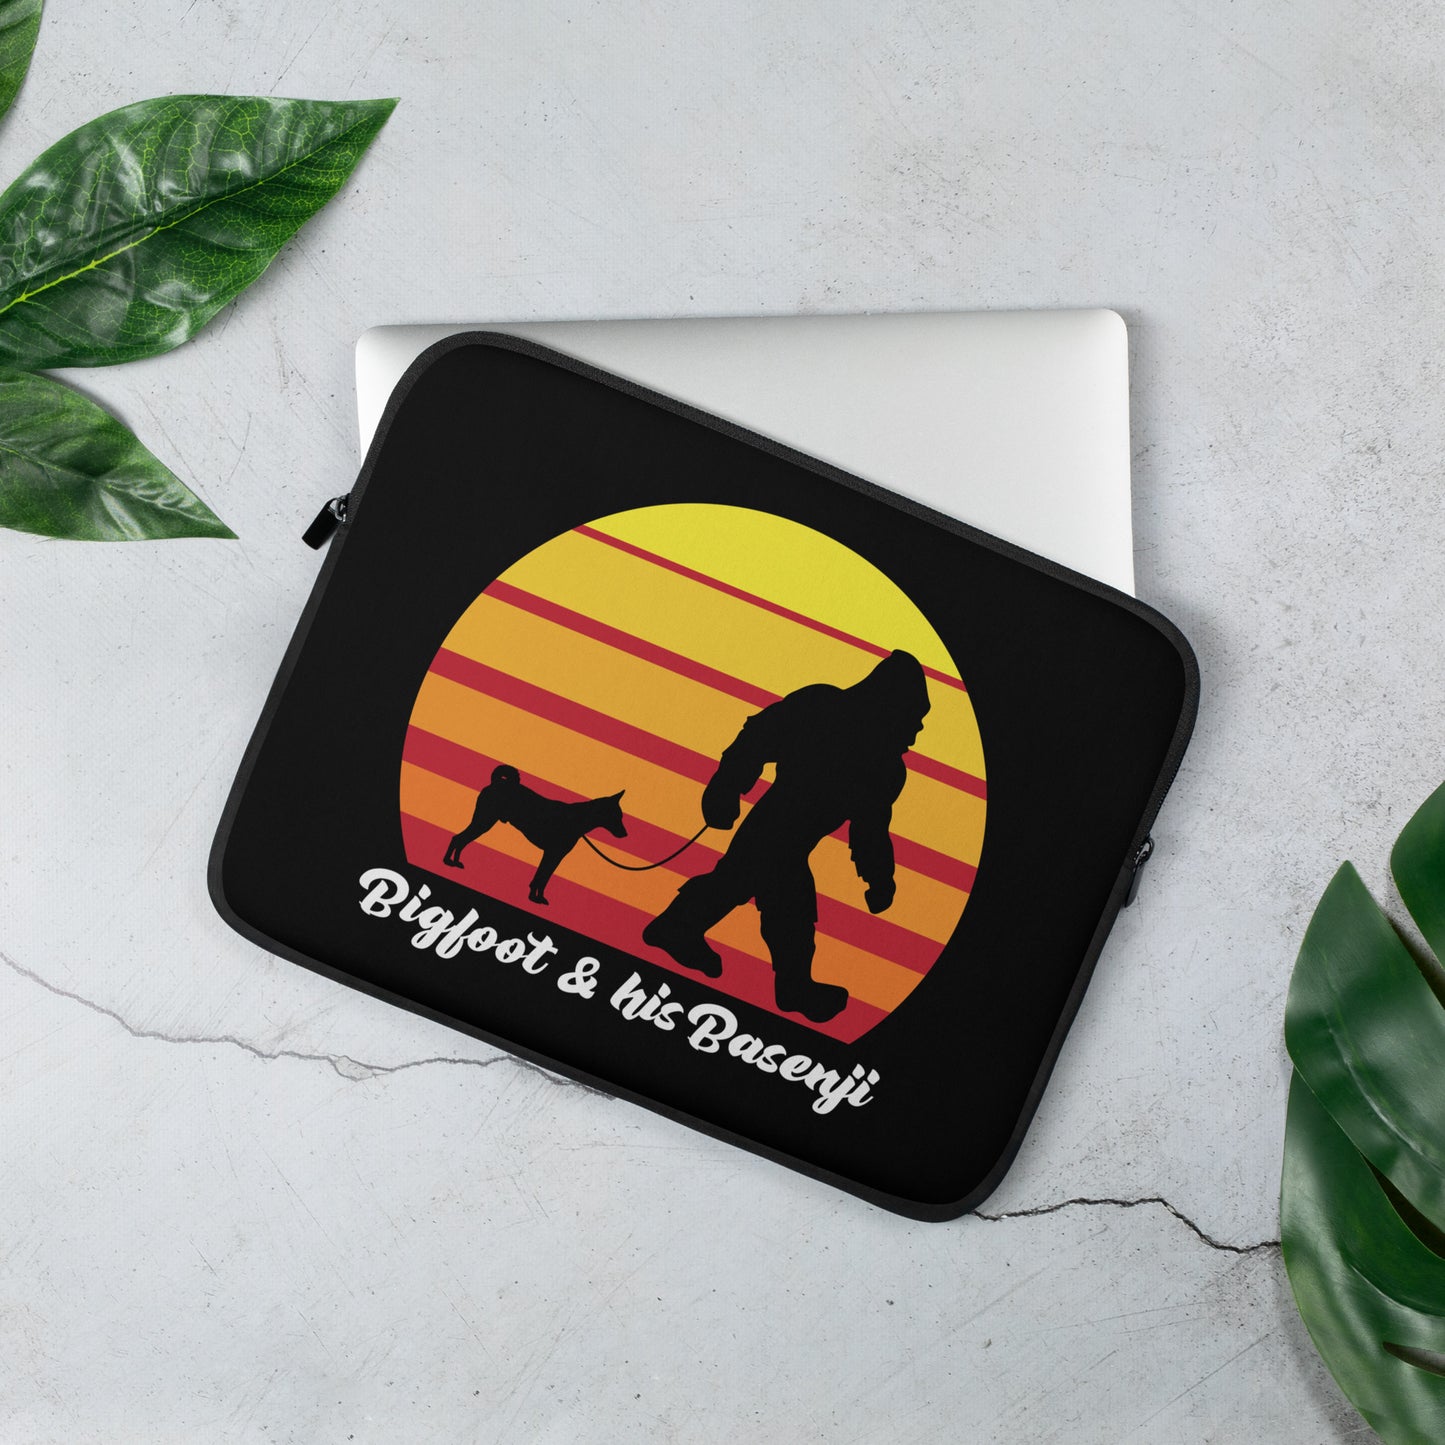 Bigfoot and his Basenji Laptop Sleeve by Dog Artistry.